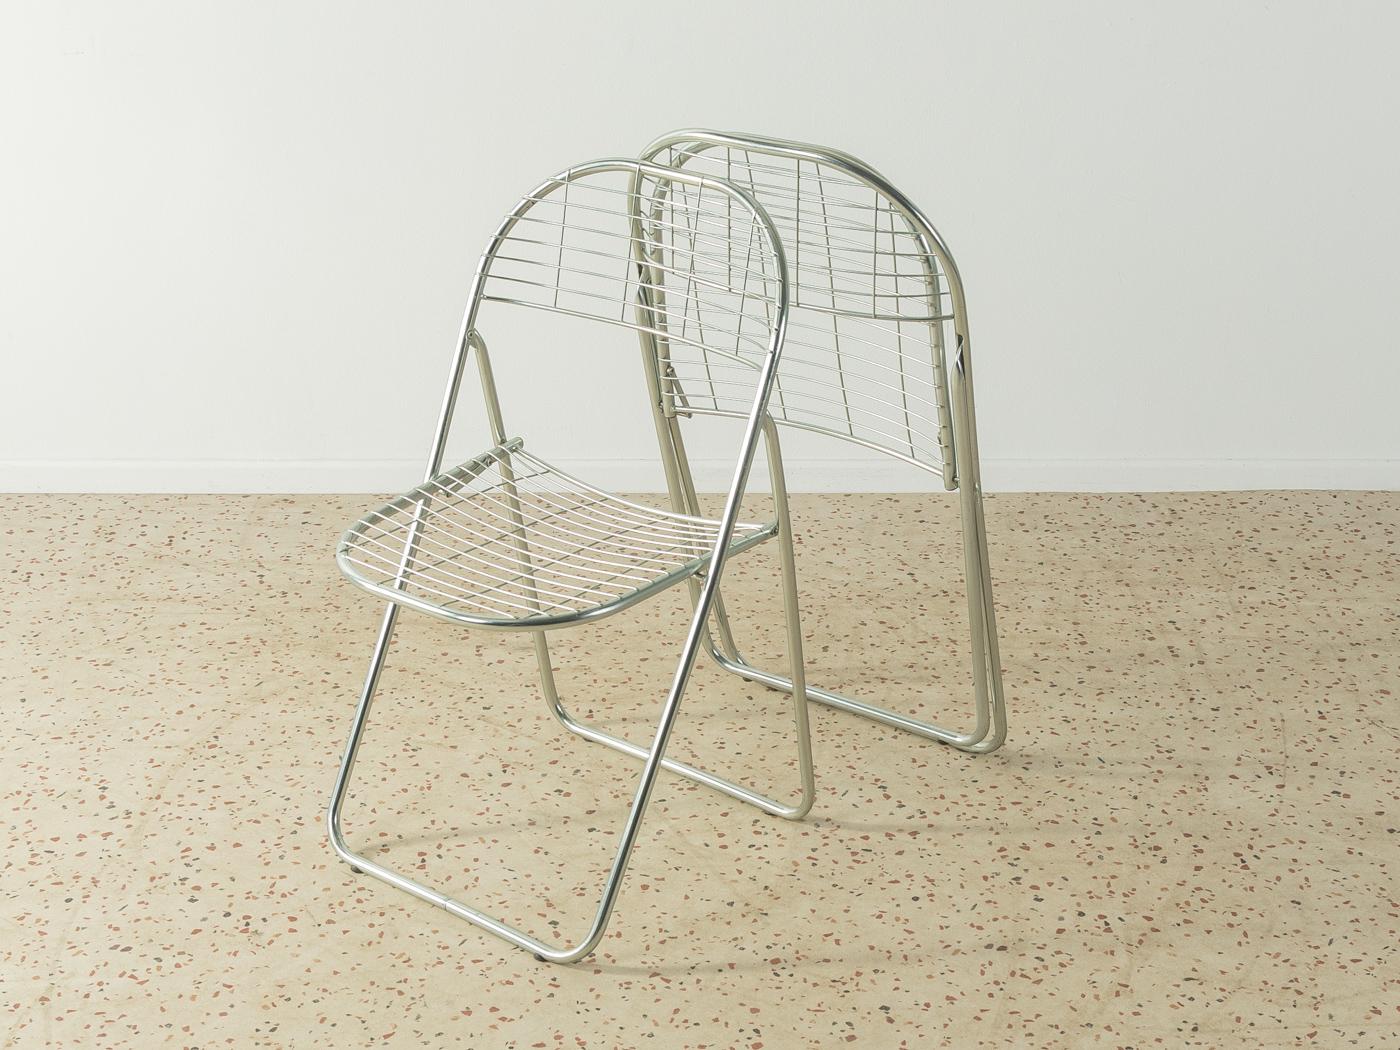 Åland metal folding chairs by Niels Gammelgaard for IKEA from the 1970s. The offer includes 2 chairs.

Quality Features:
 good workmanship
 high-quality materials
 Made in Sweden. Design: Niels Gammelgaard, manufacturer: IKEA.